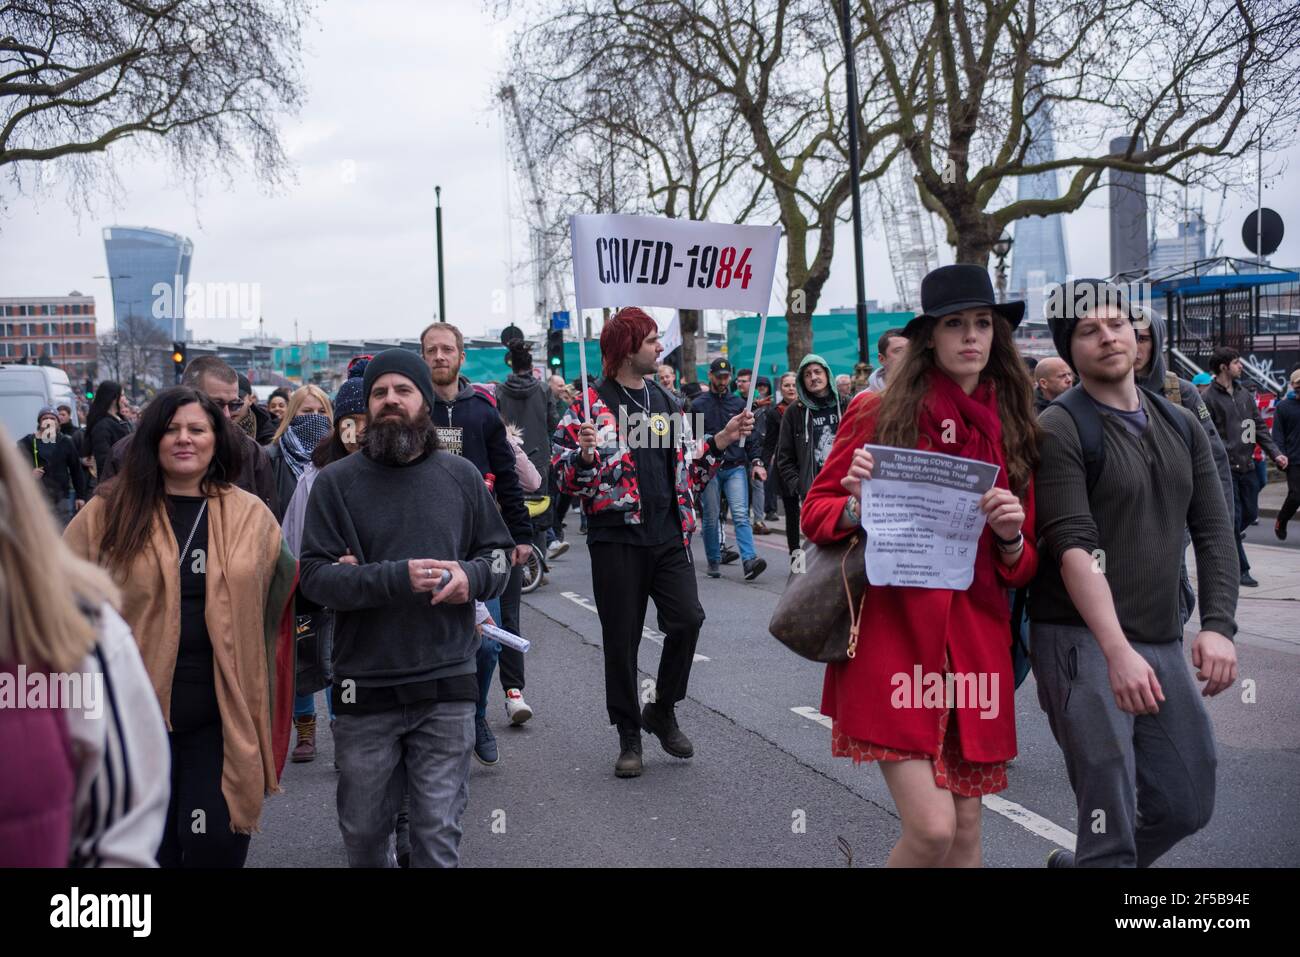 London, 20th March, 2021.  Draconian opinions during Anti-lockdown protests in London, UK. Credit: Kevin Seivwright/Alamy Live News. Stock Photo